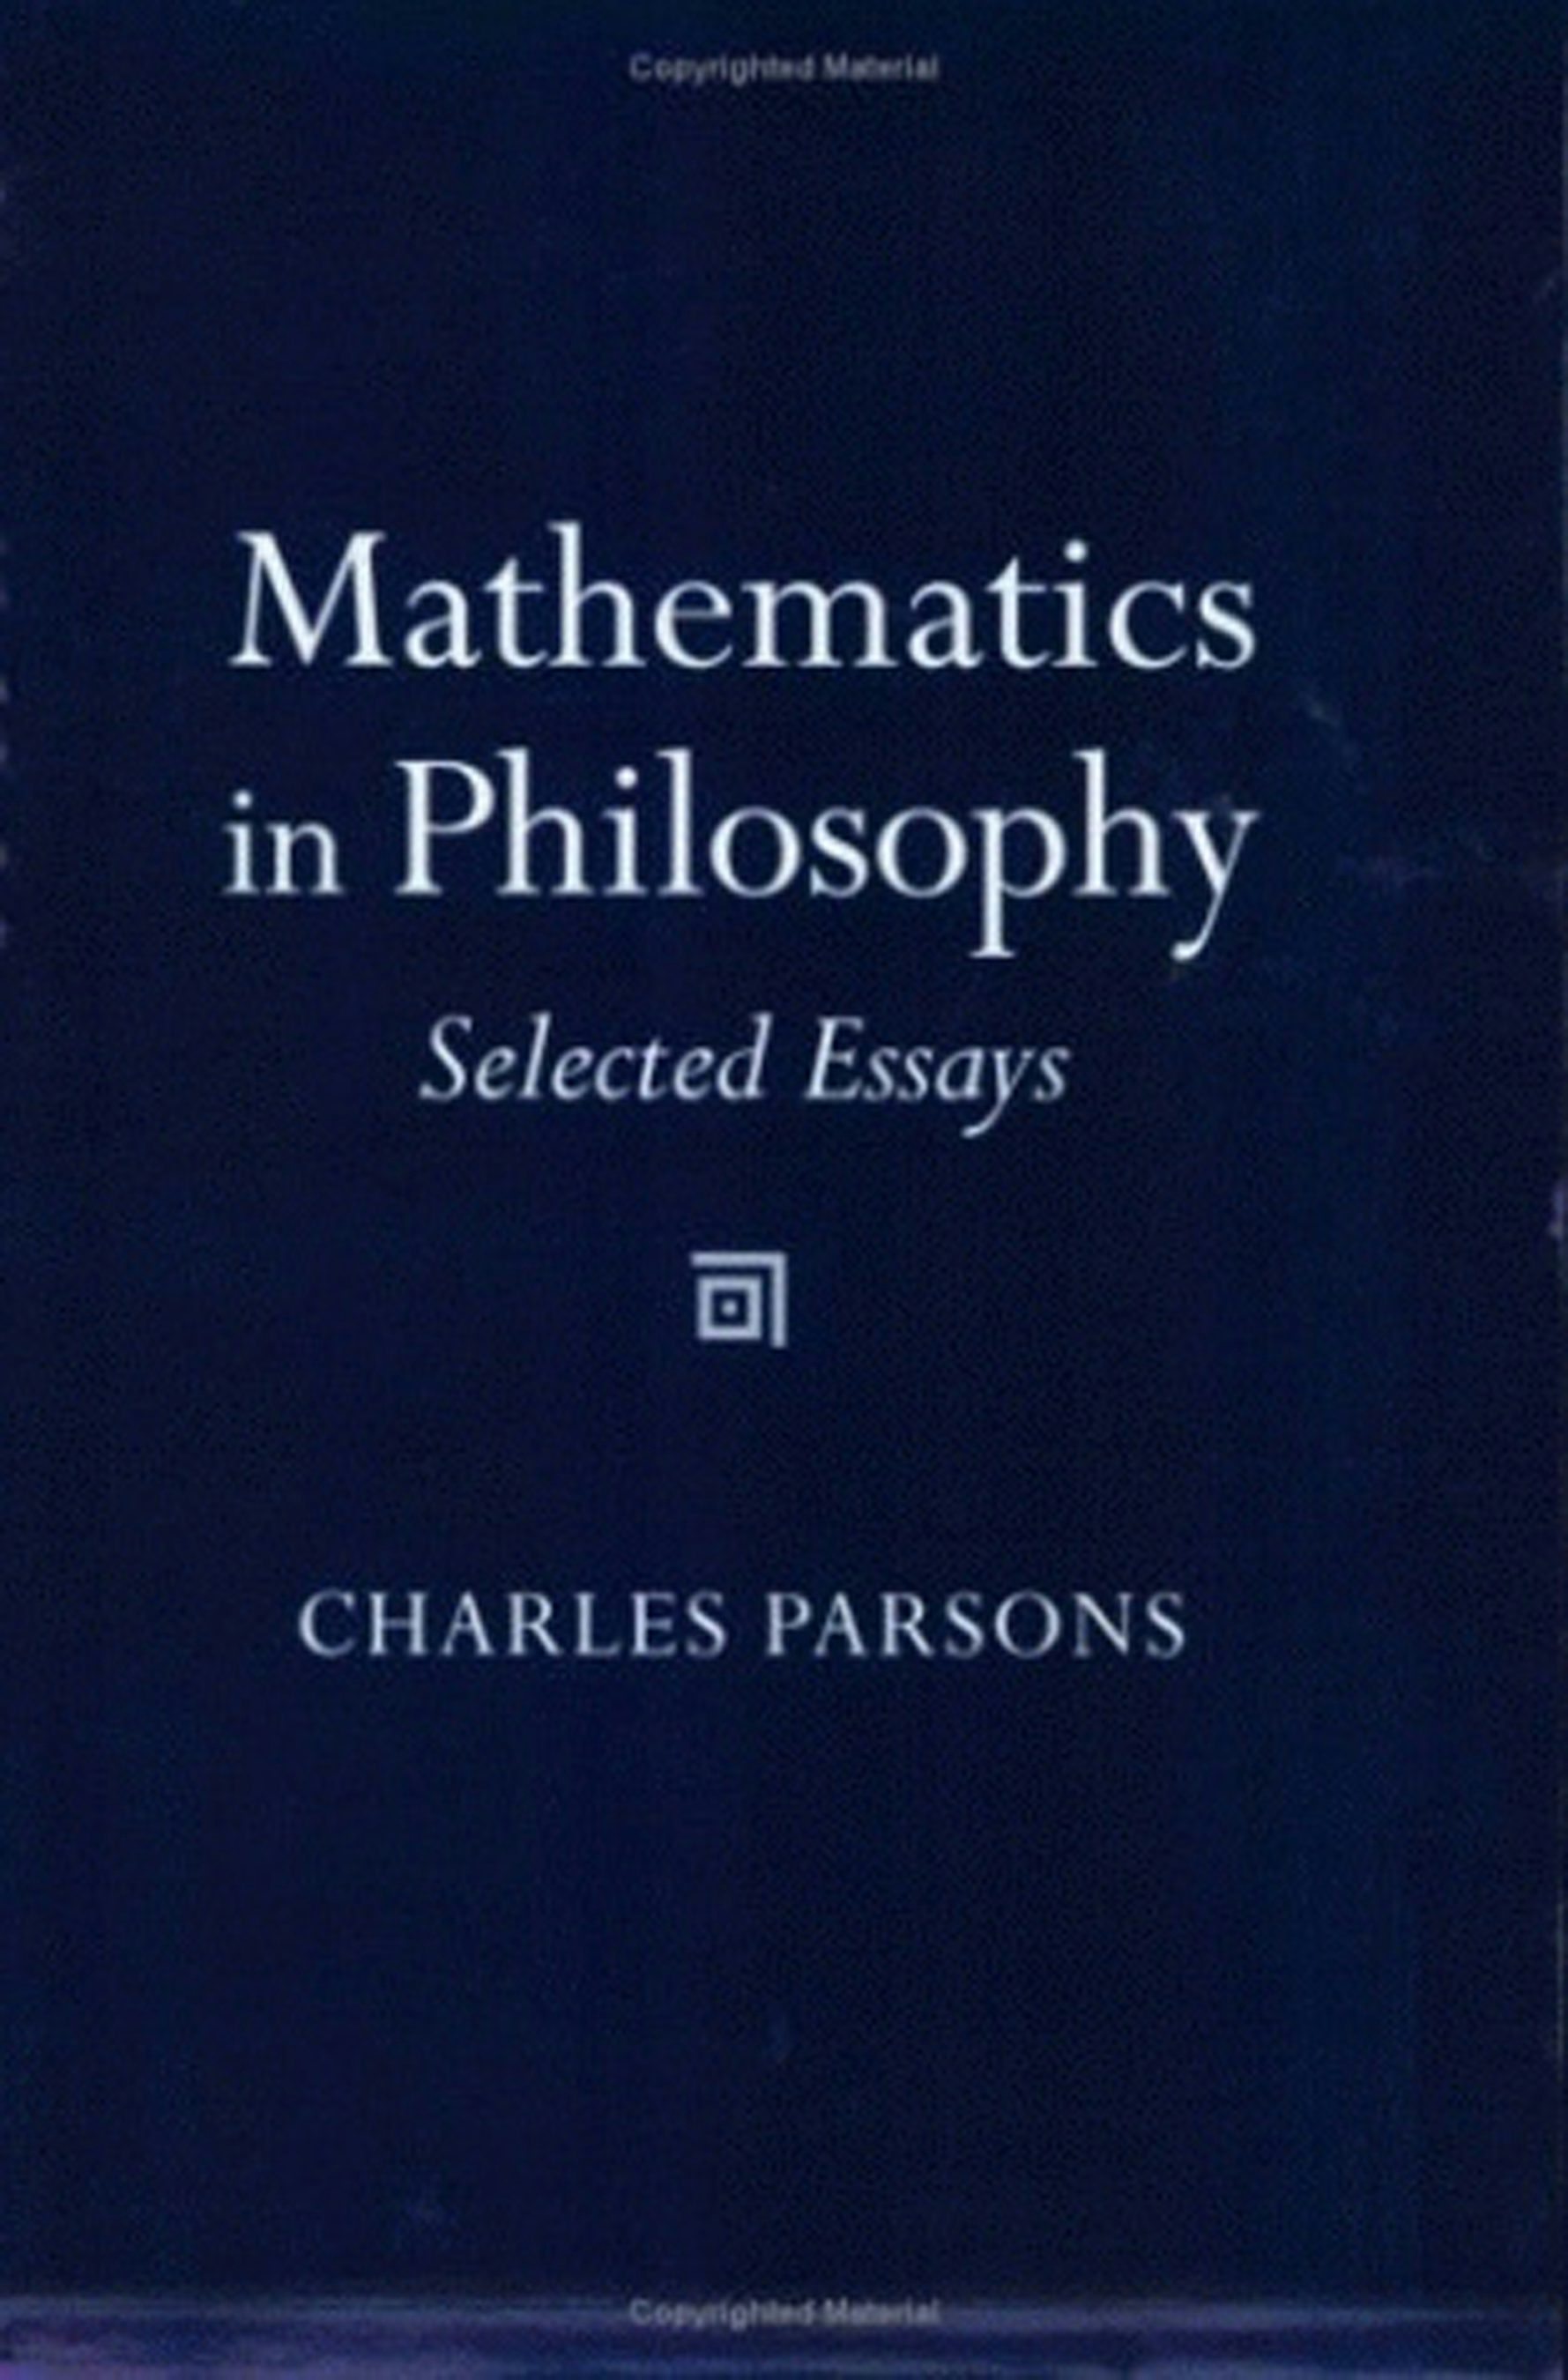 Mathematics in Philosophy by Charles D. Parsons | Hardcover